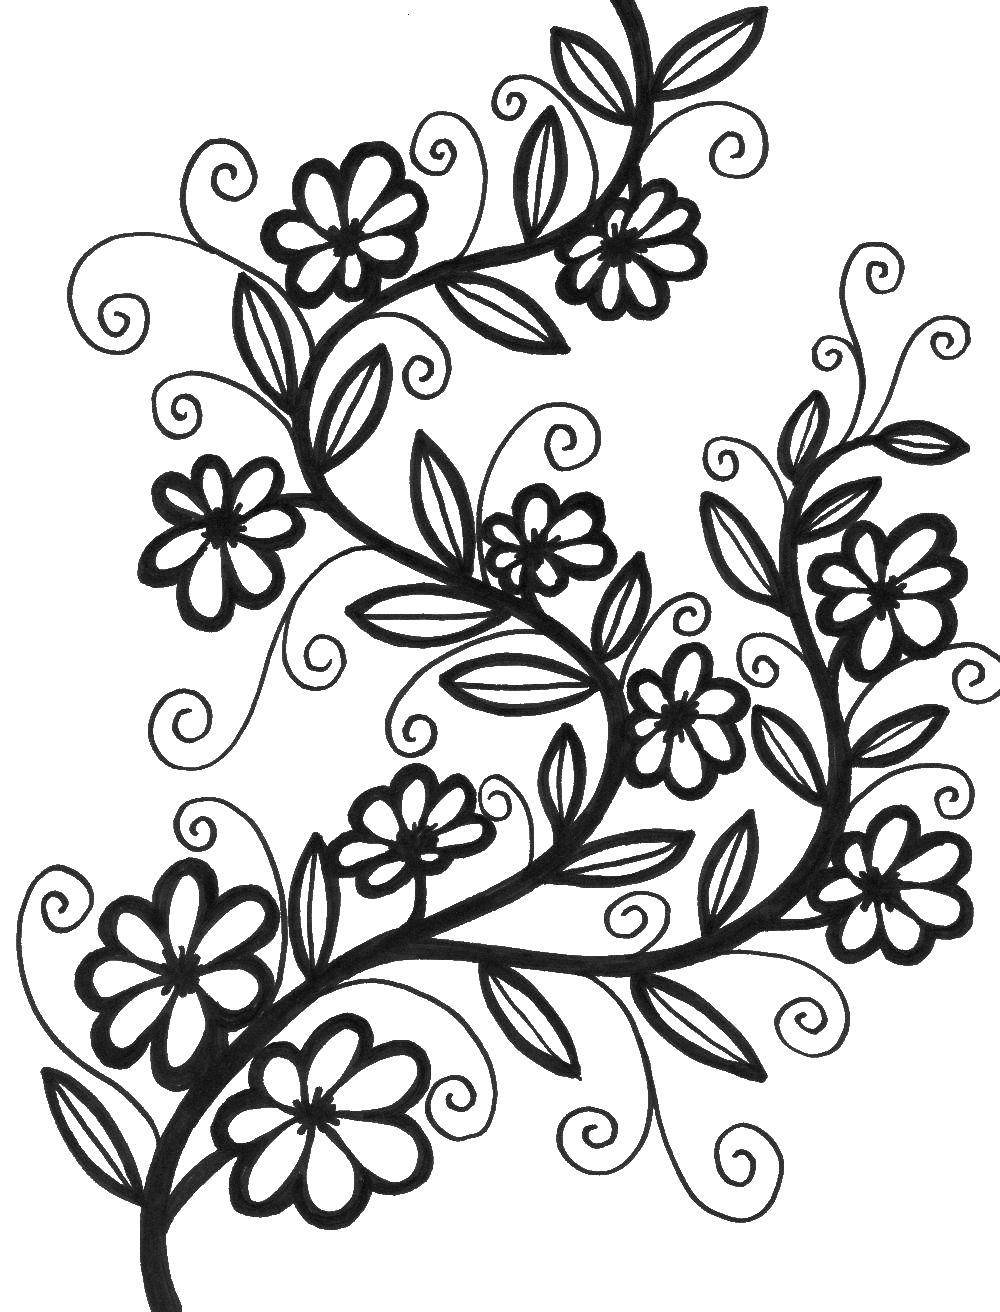 Coloring Patterns. Category patterns. Tags:  pattern , flowers.